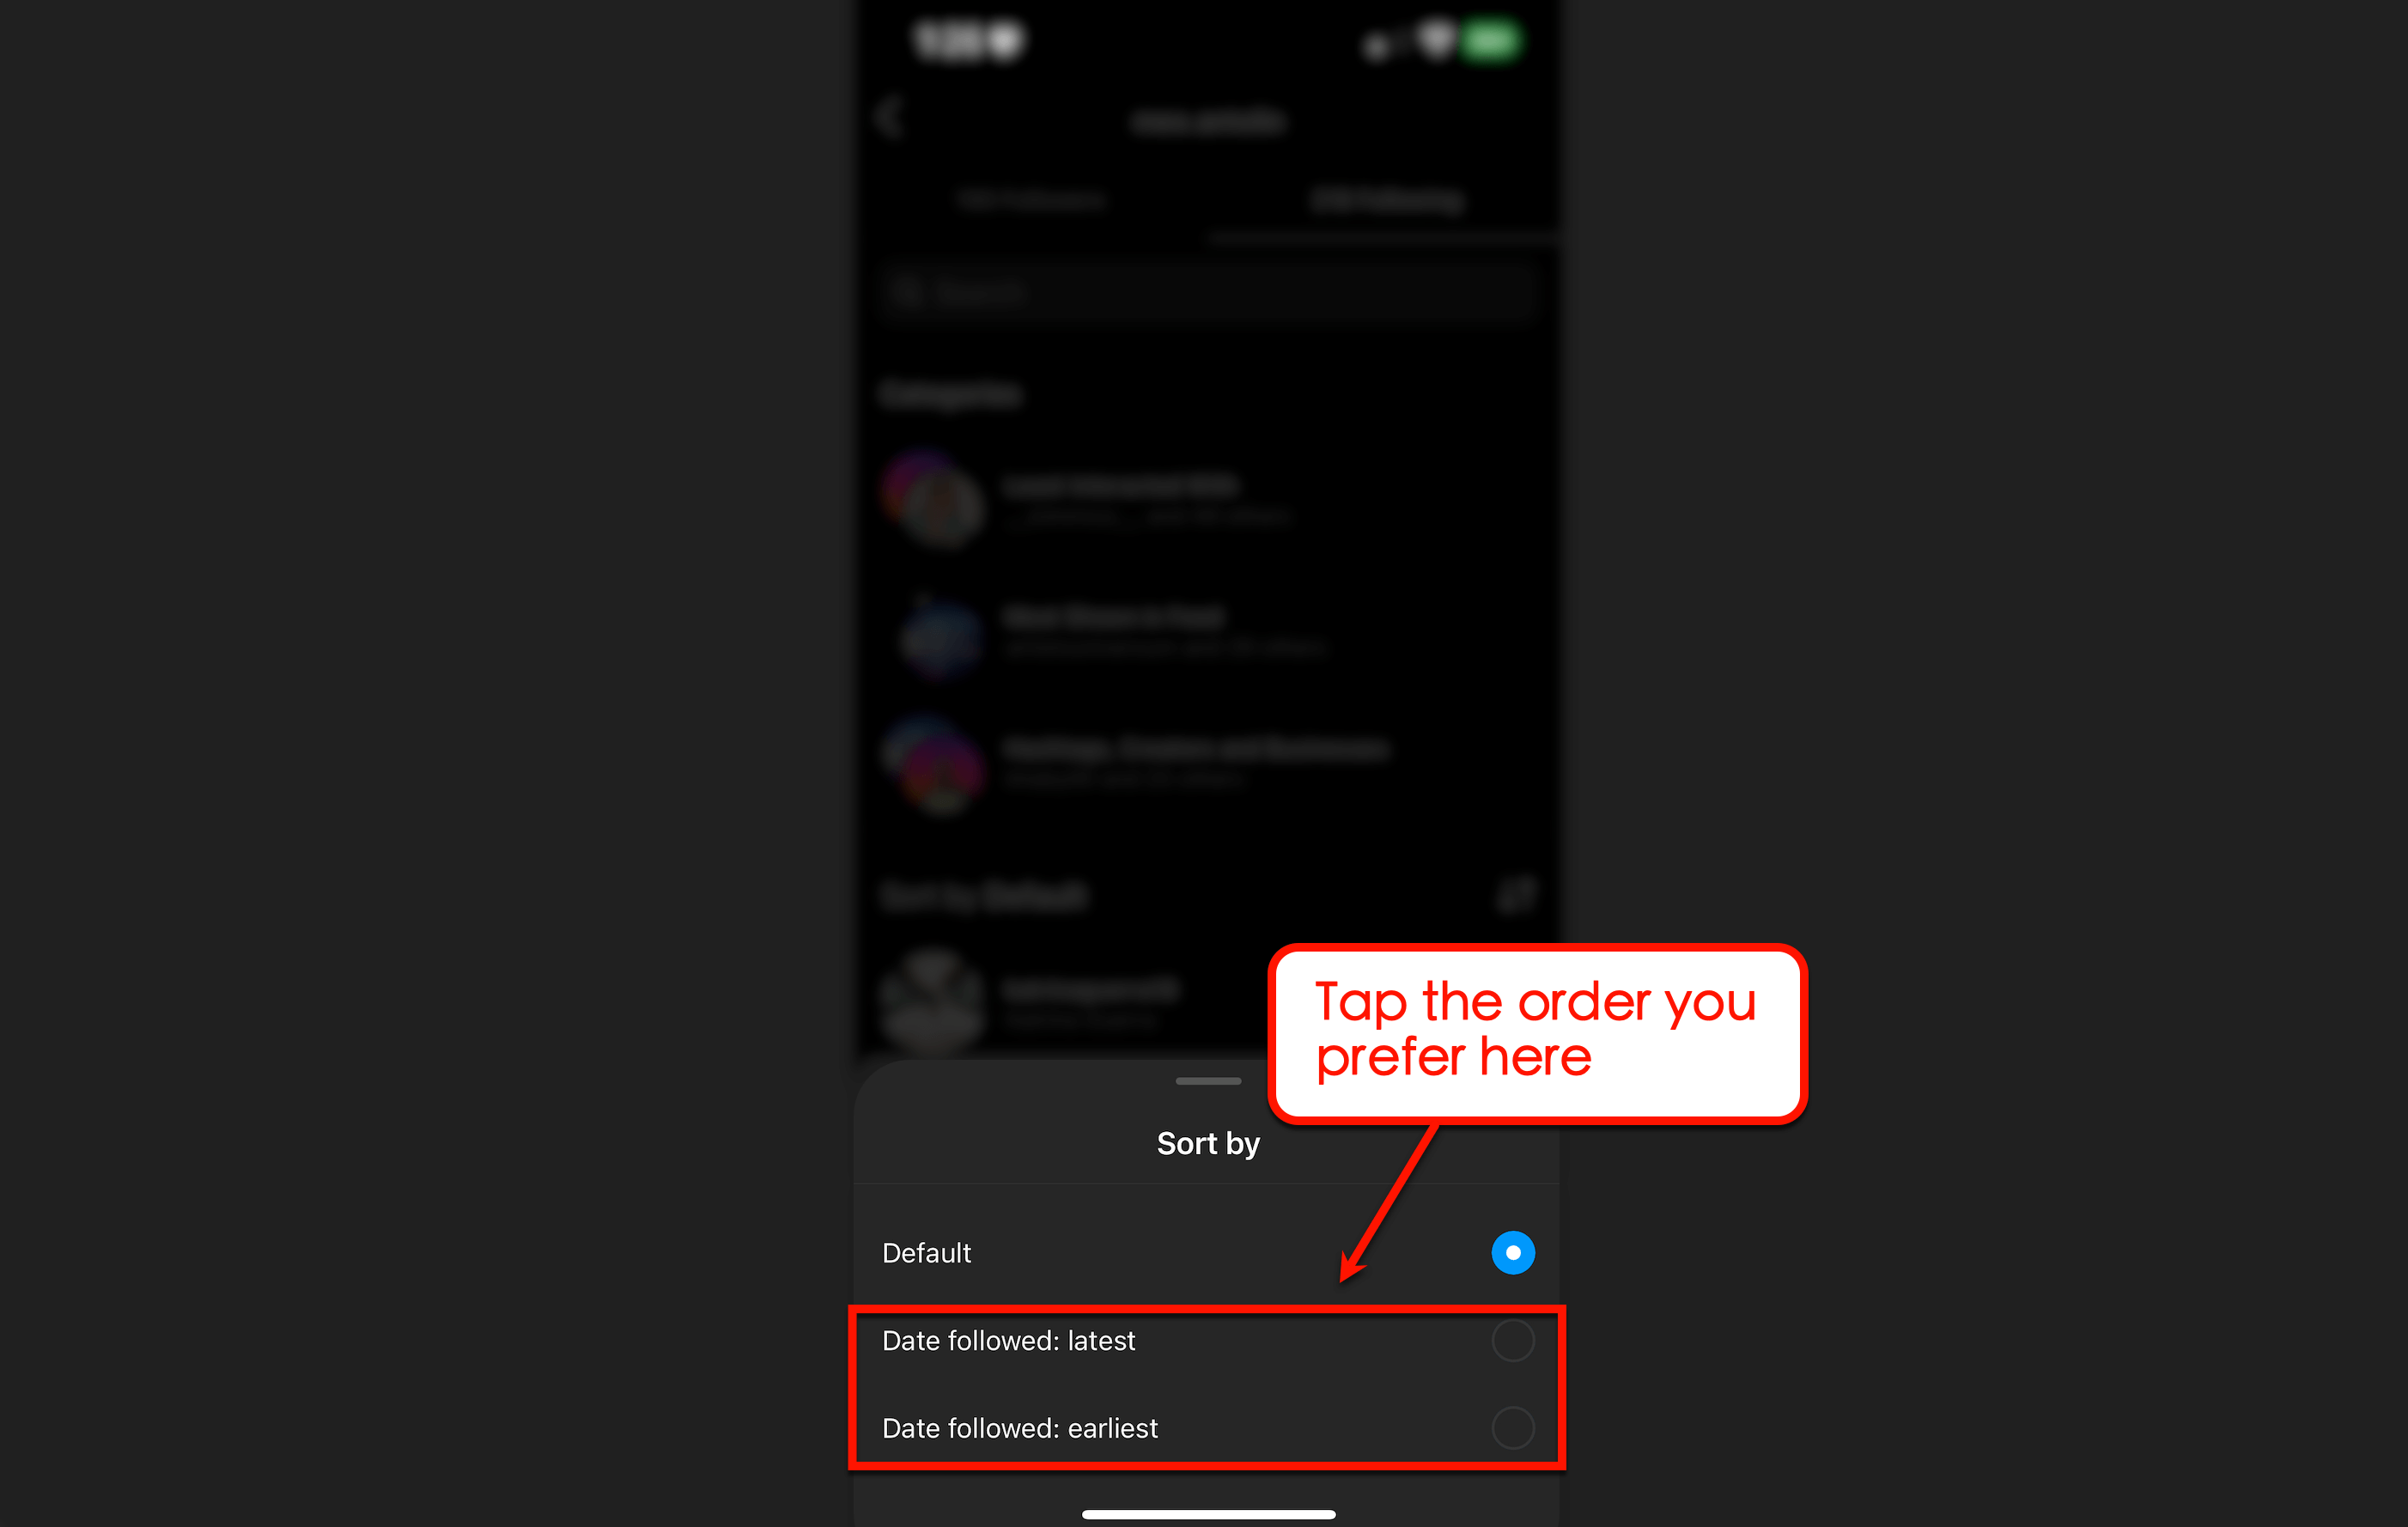 Tap to change order preference